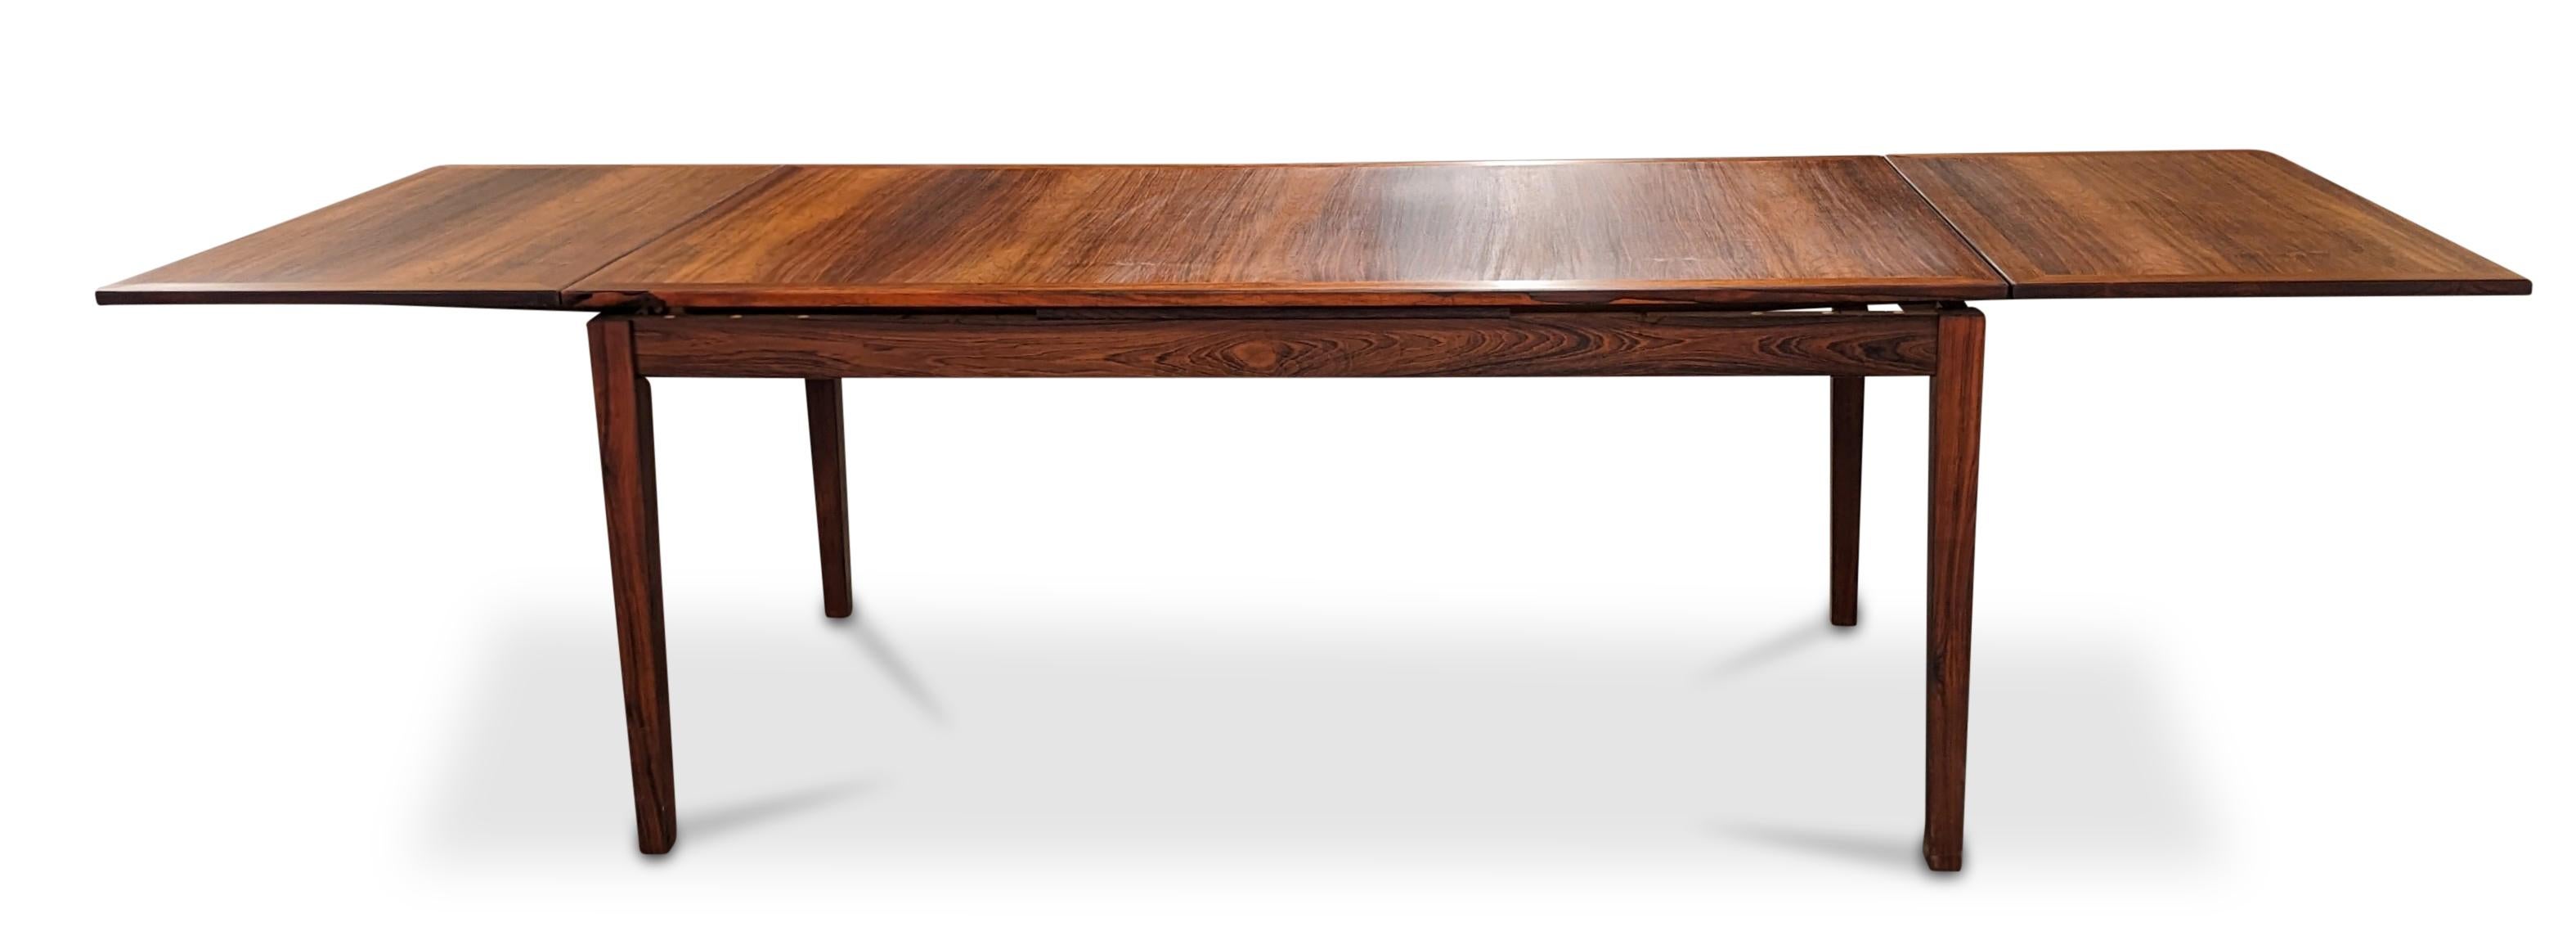 Kai Winding Rosewood Dining Table w Two Hidden Leaves, Vintage Danish 122299 3